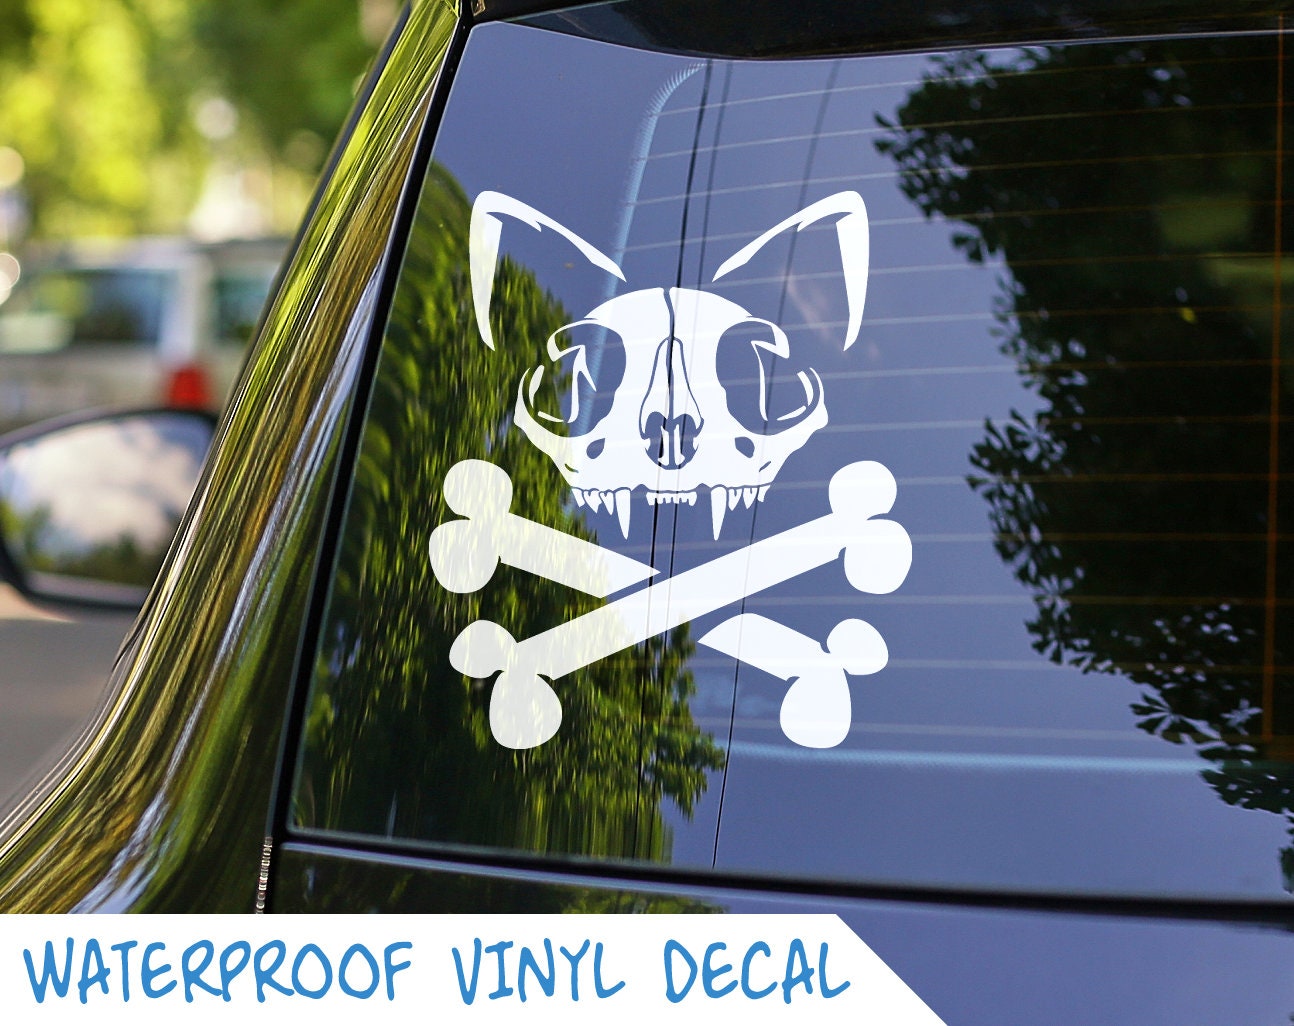 Pirate Skull Decal,Pirate Skull and Crossbones Car Decal Laptop Tablet  Cooler Wall Decal Skull Sticker Yeti Tumbler